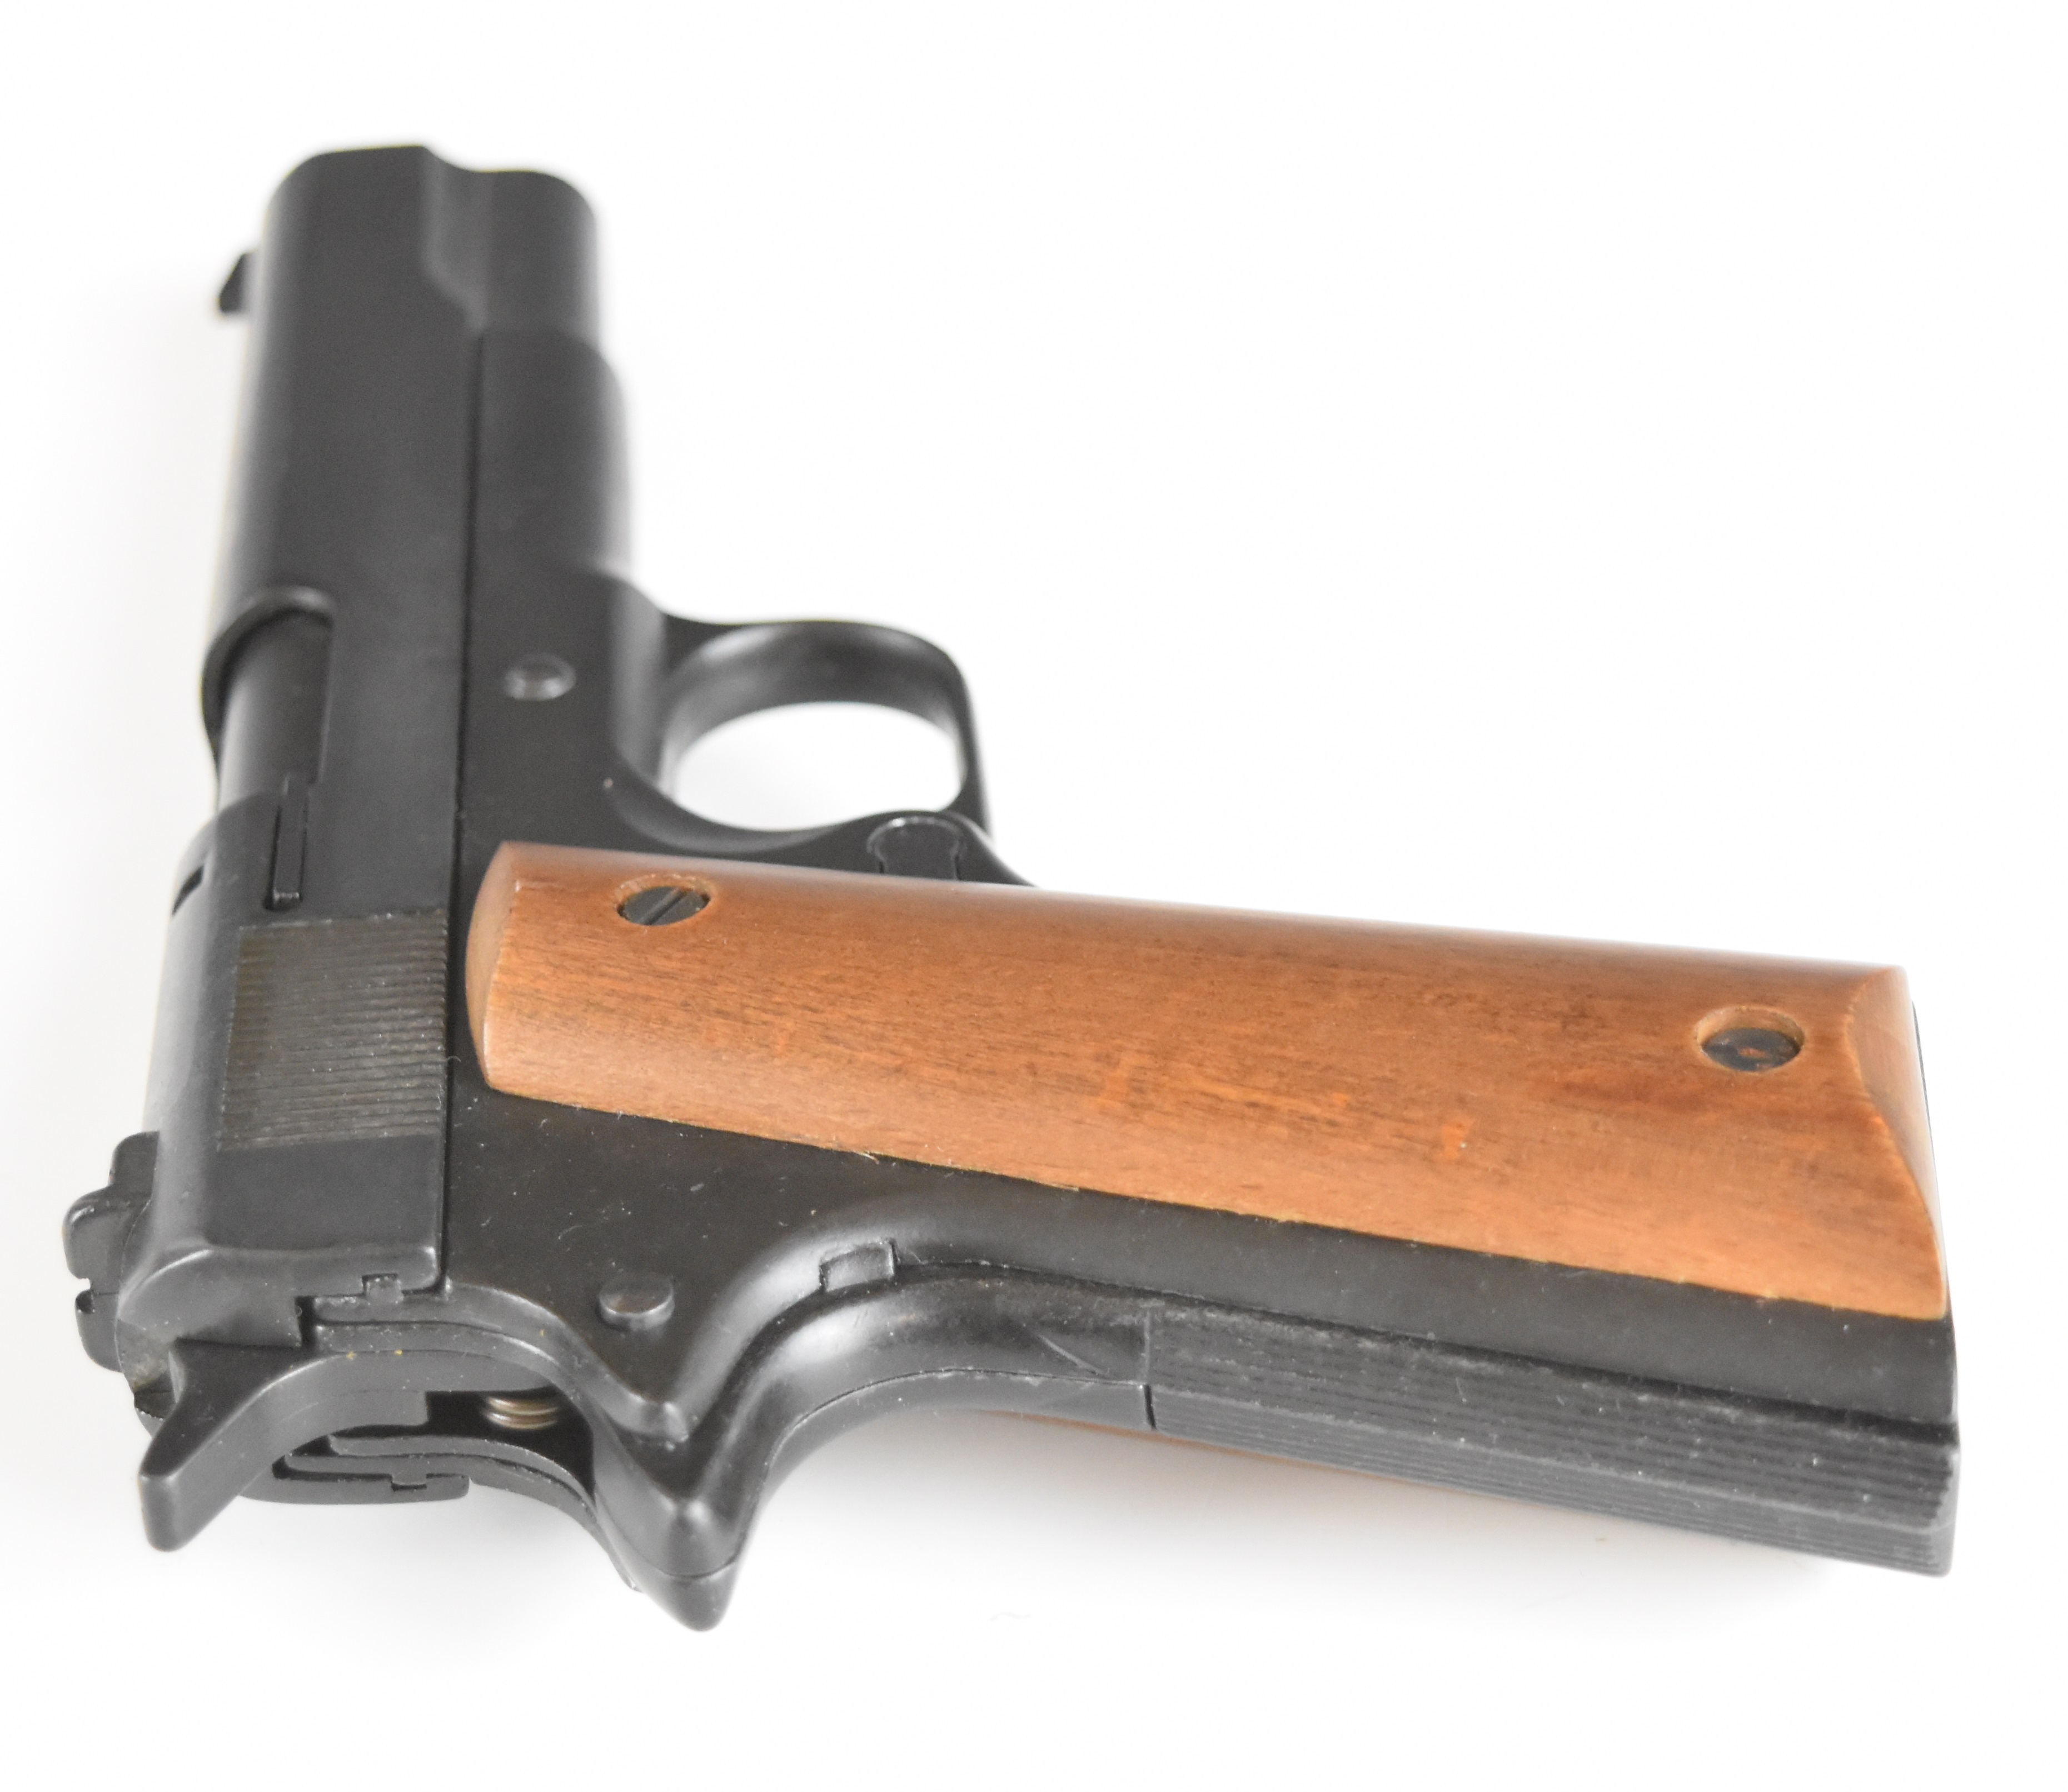 BBM Bruni 96 8mm blank firing pistol with wooden grips, in original box with instruction manual - Image 4 of 12